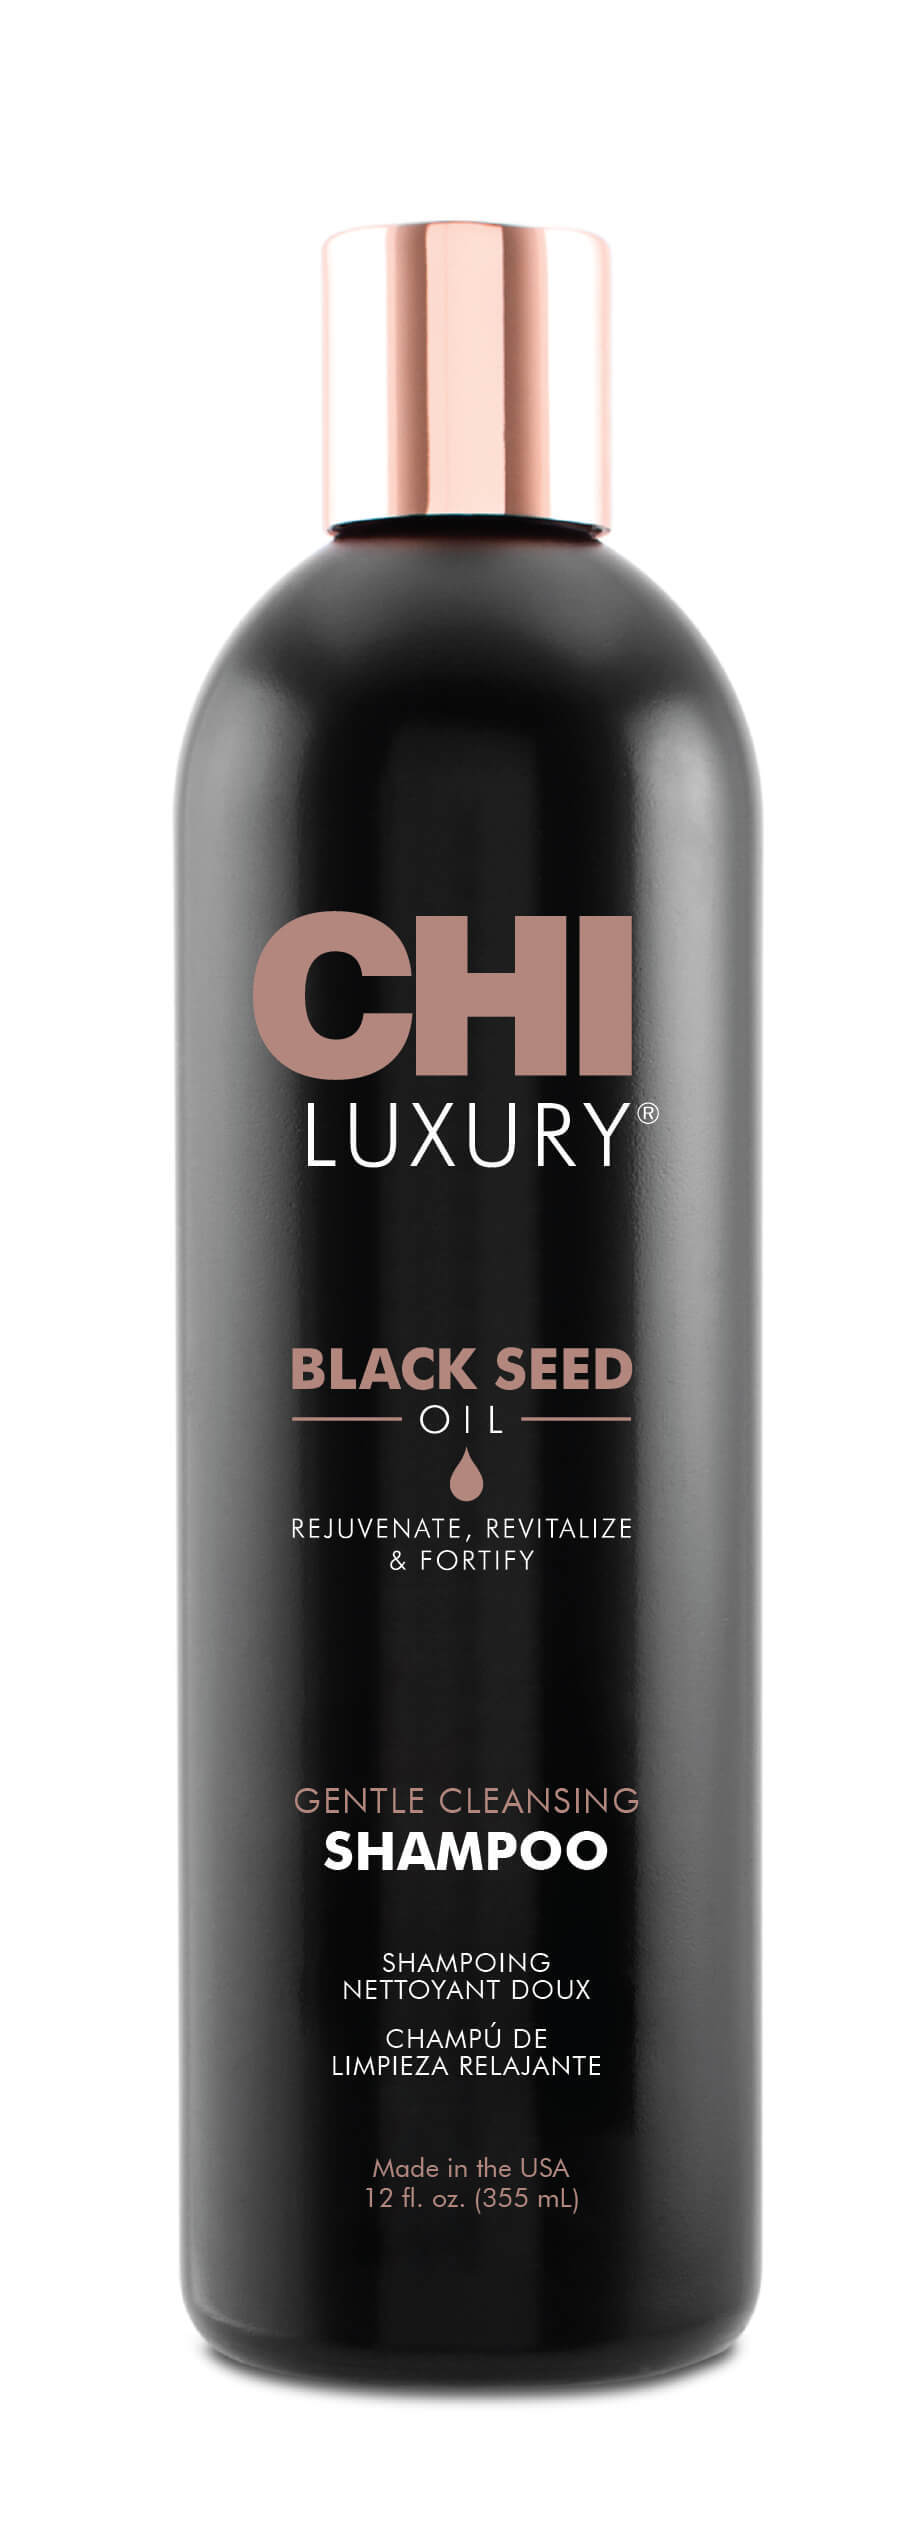 - CHI Luxury Black Seed Oil Gentle Cleansing Shampoo